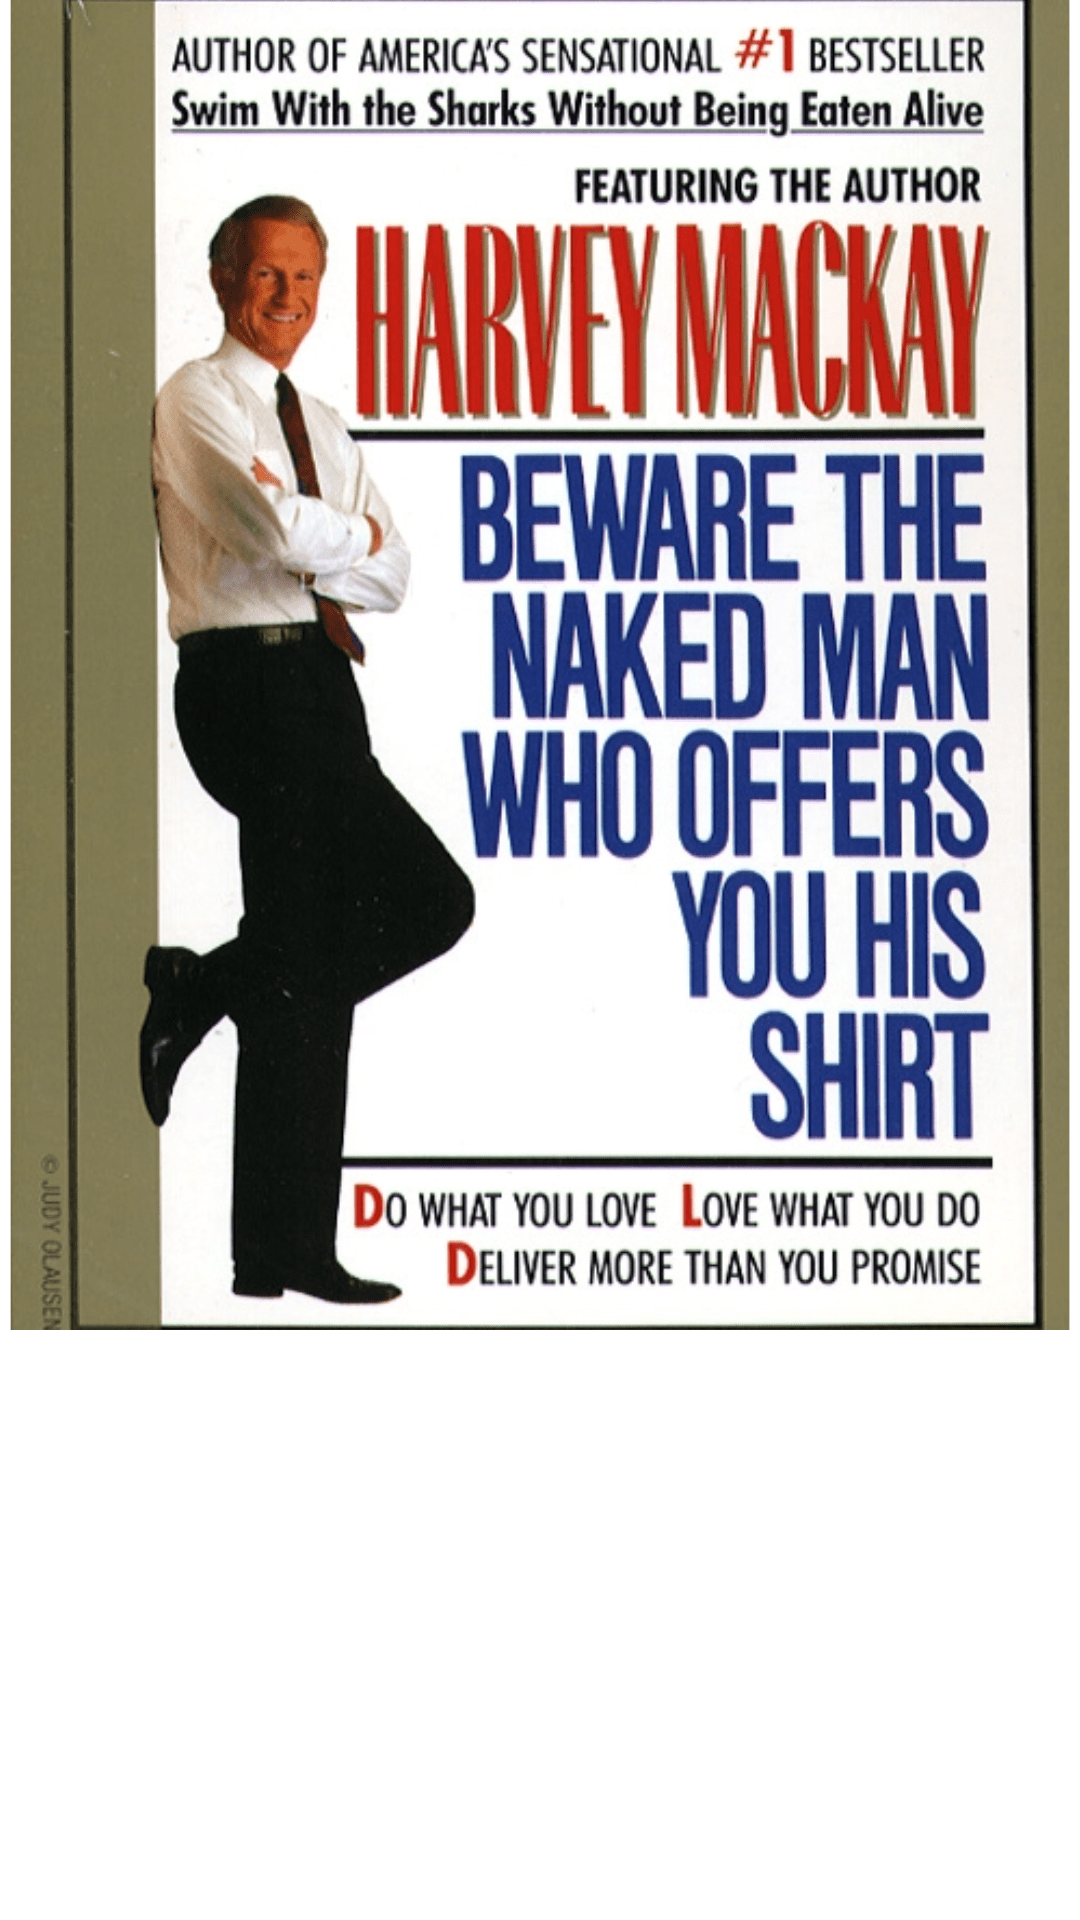 Beware the Naked Man Who Offers Your His Shirt